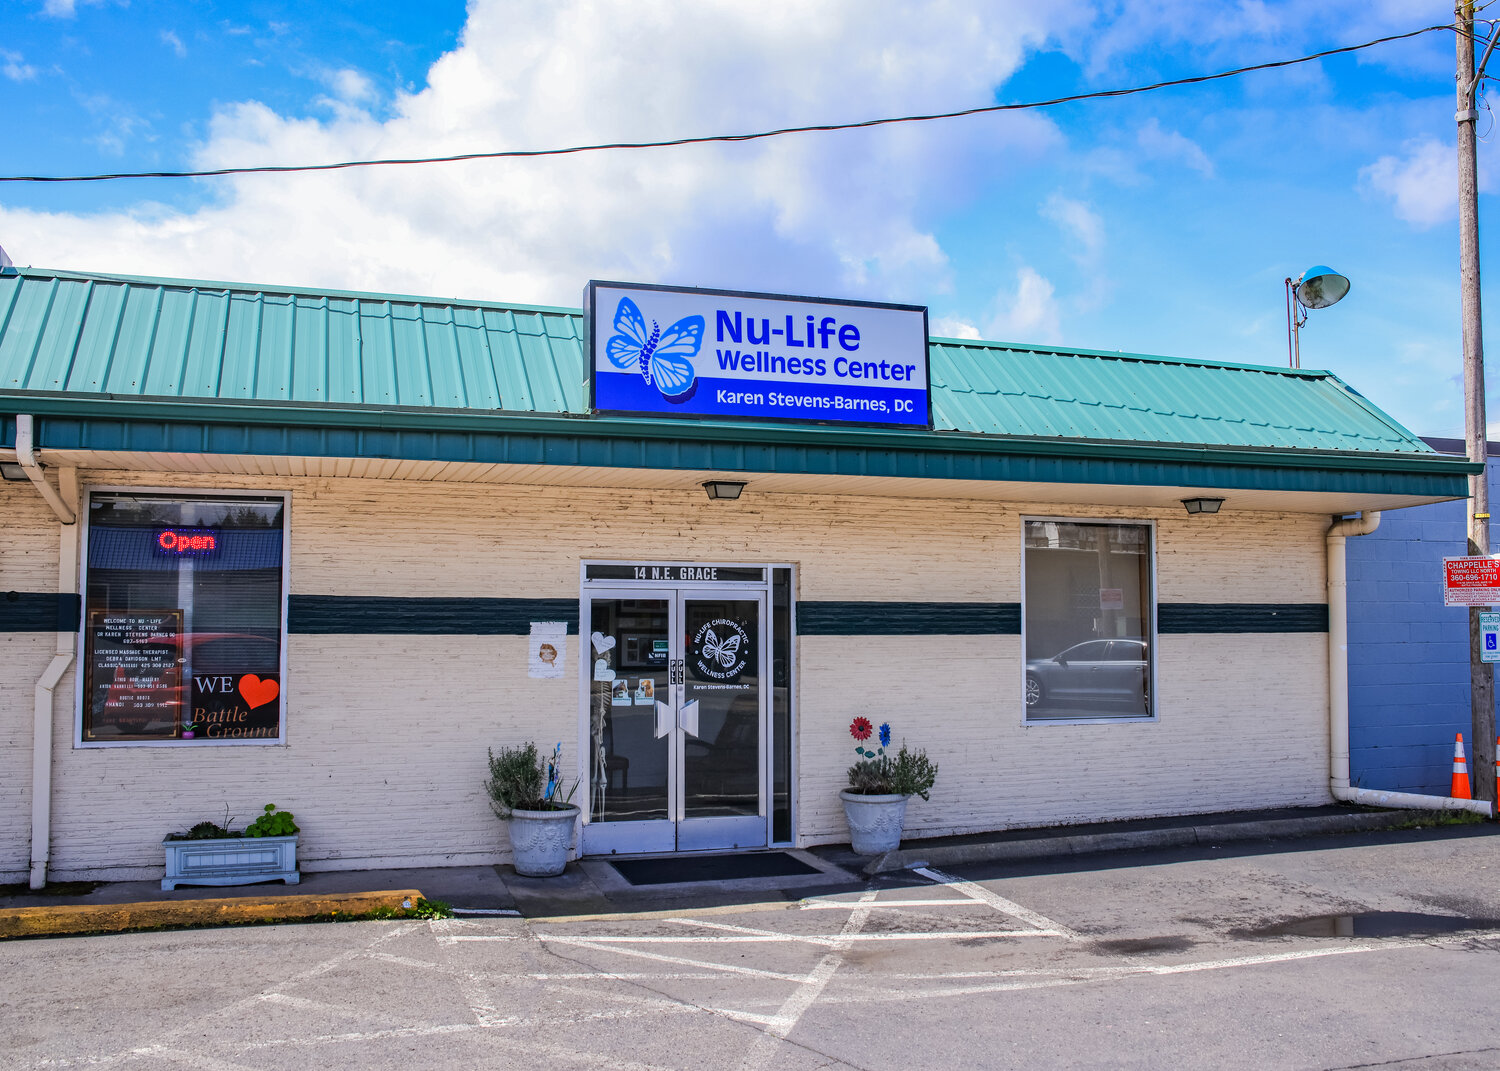 Nu-Life Wellness Center is located at 14 NE Grace Ave. in Battle Ground.